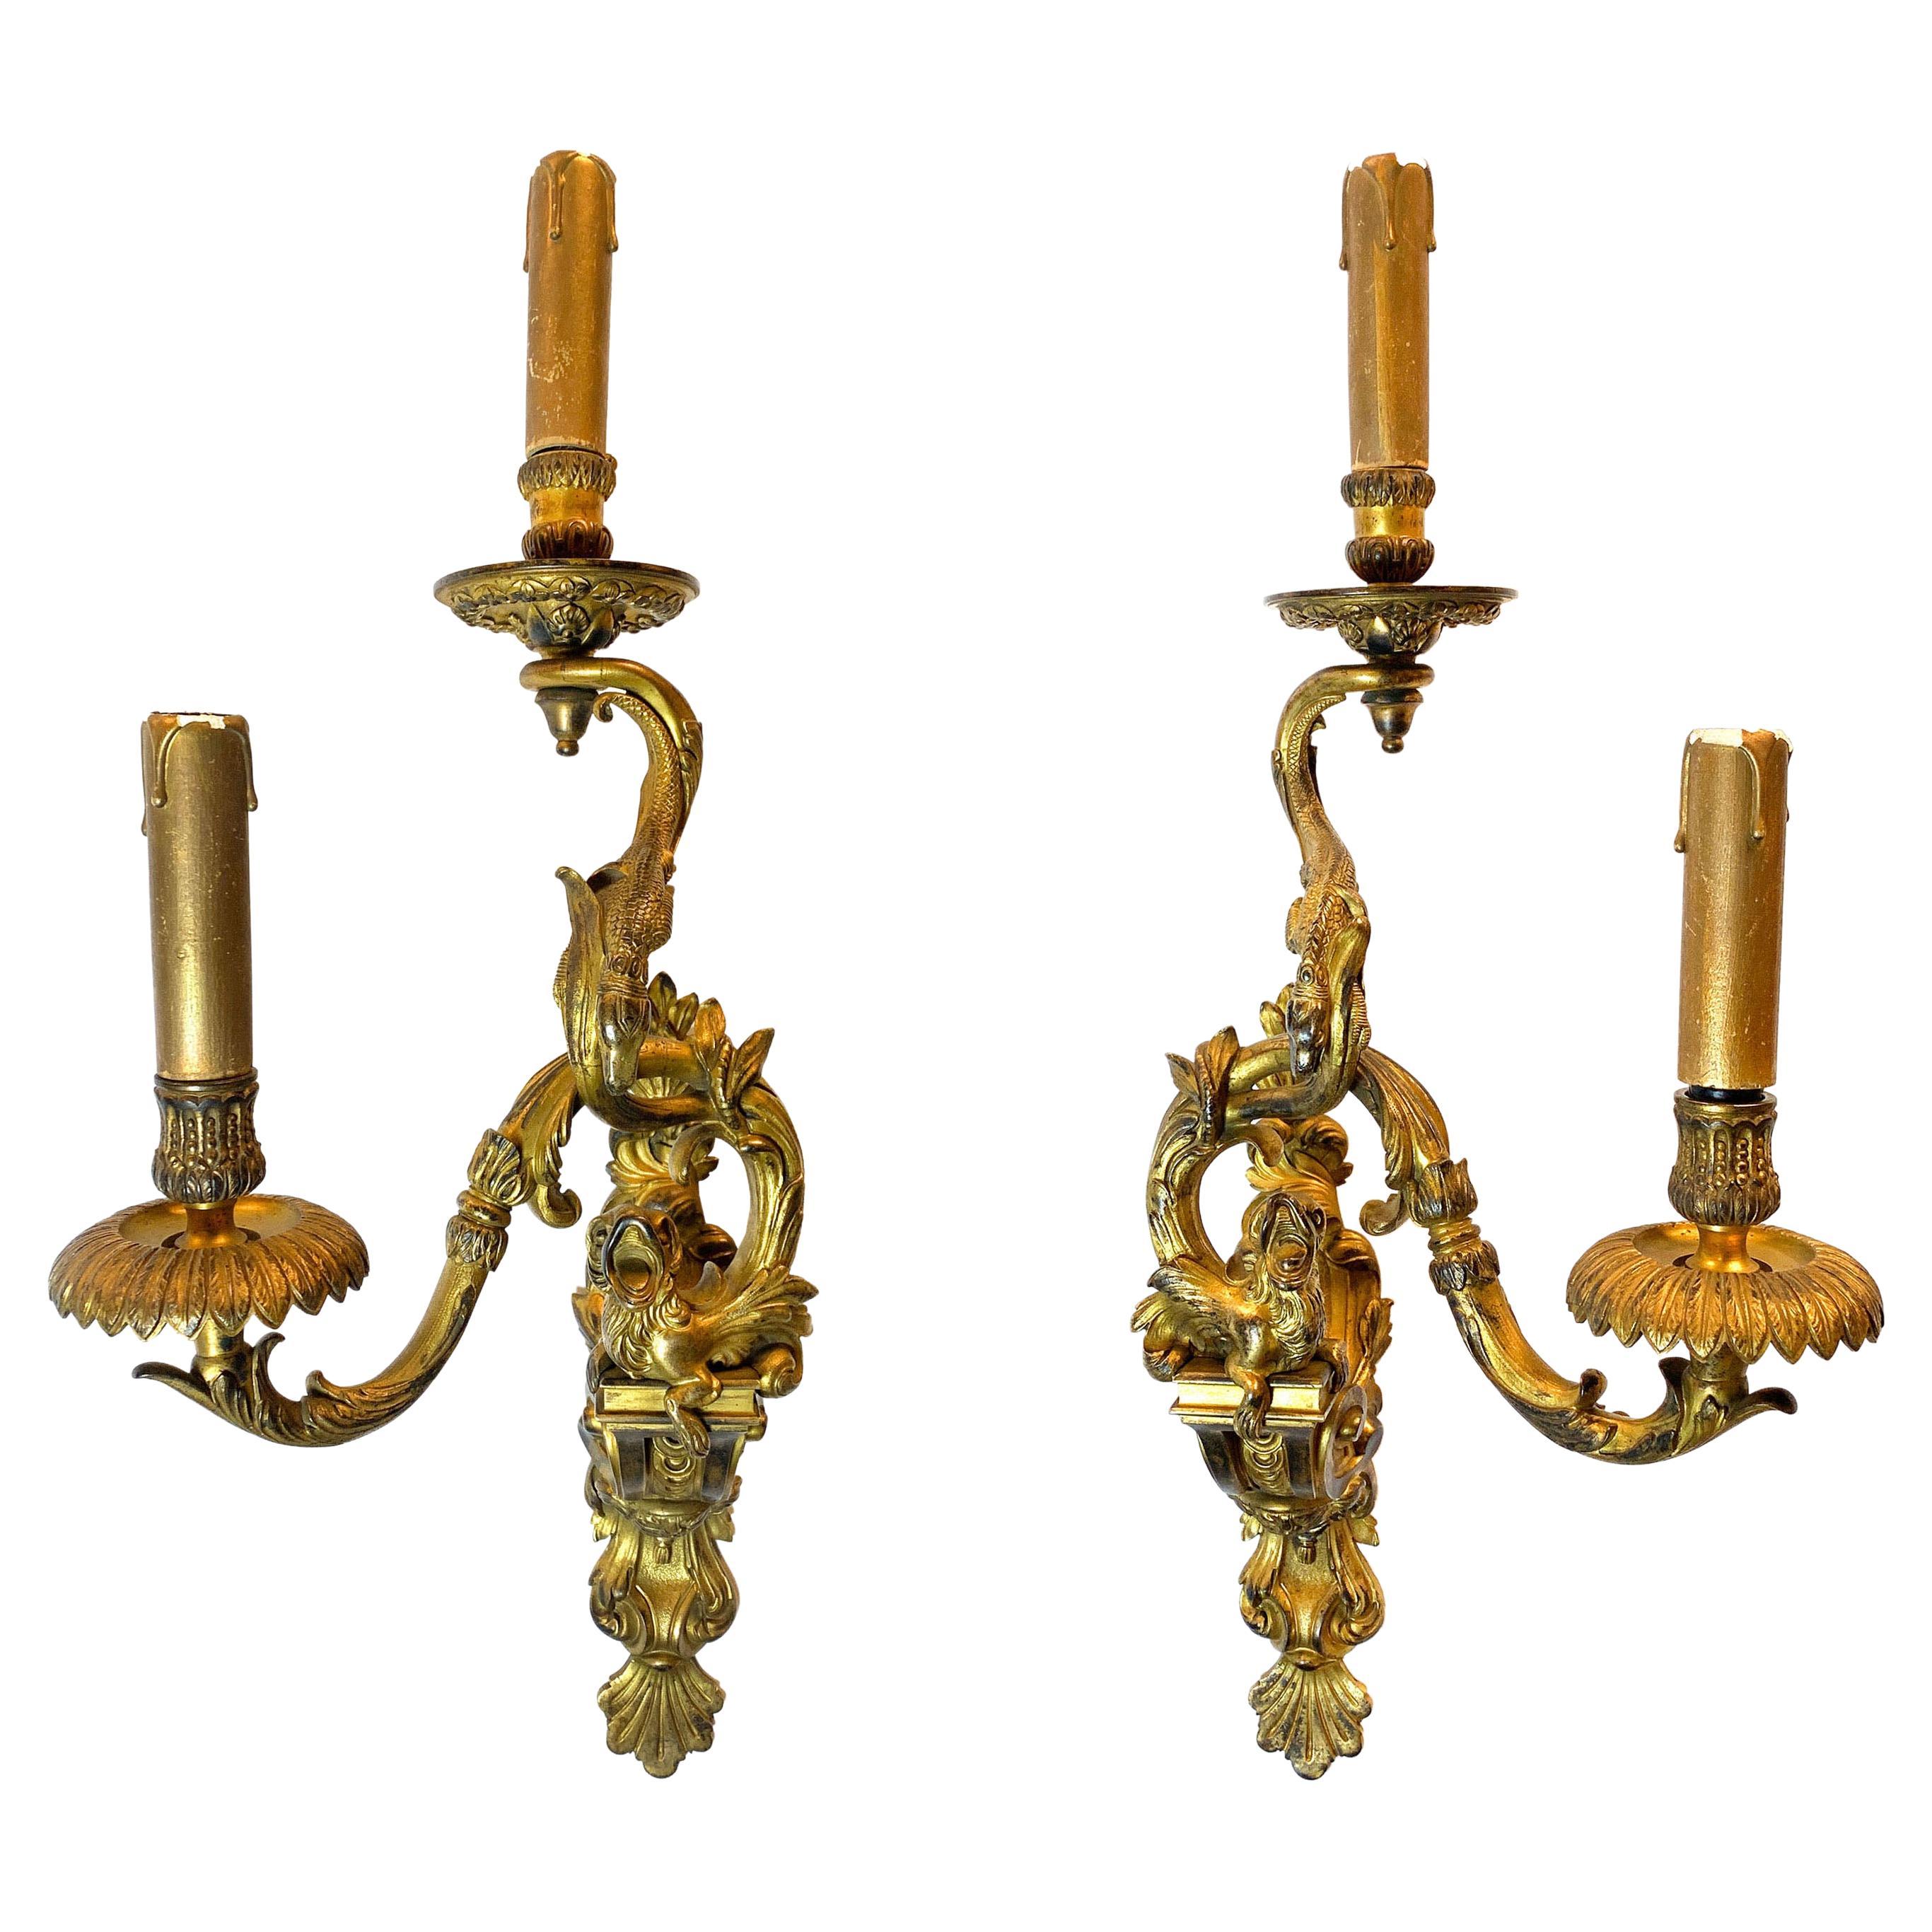 Pair of 19th Century Louis XV Style Ormolu Sconces After André-Charles Boulle For Sale